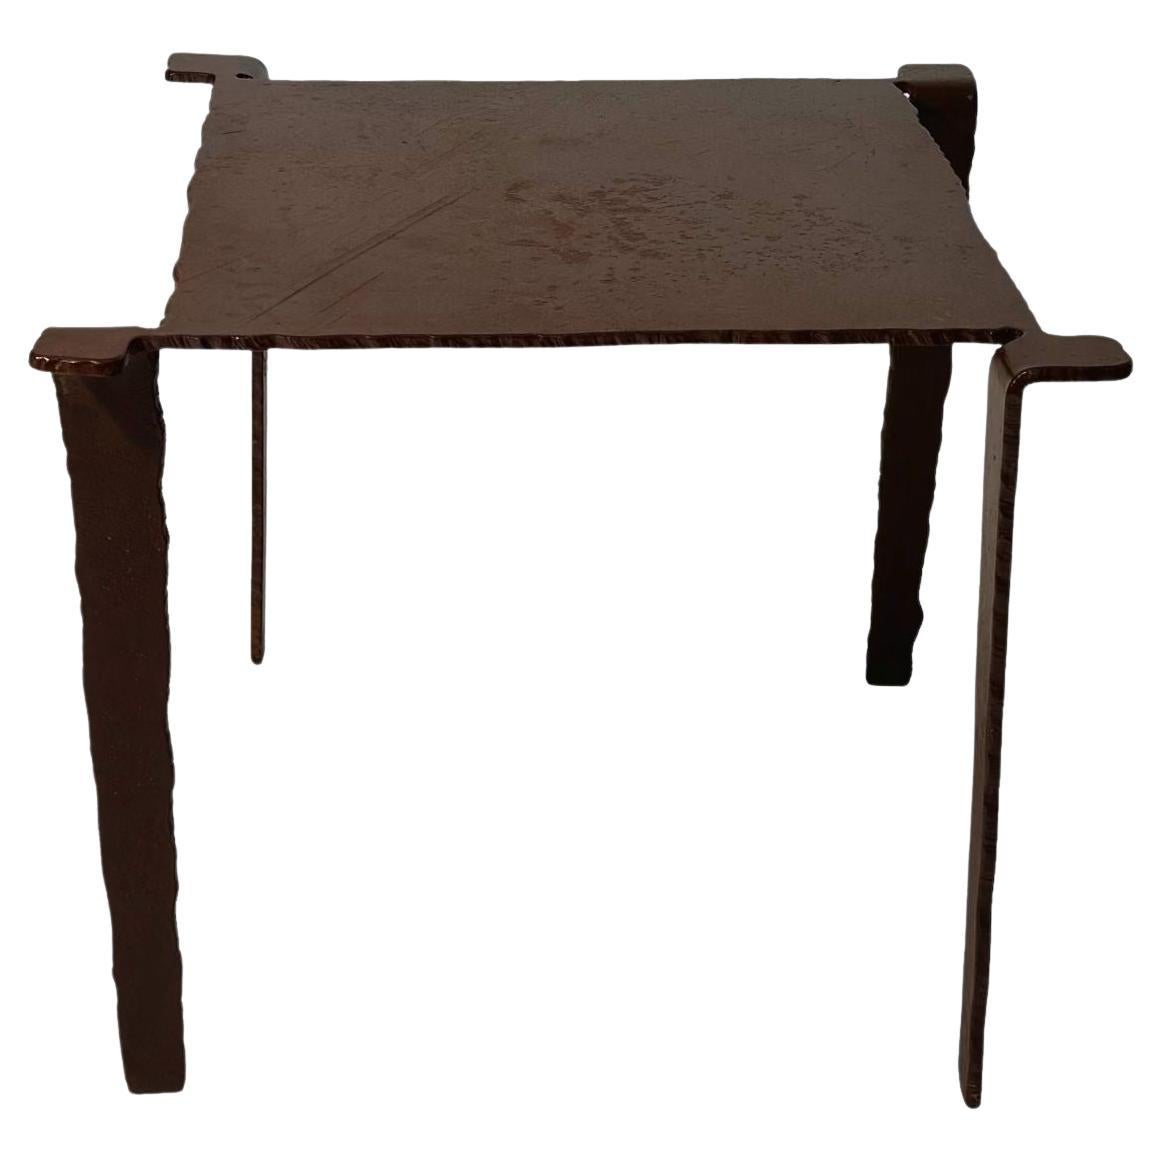 Sculptural Steel Table in the Style of Giacometti For Sale